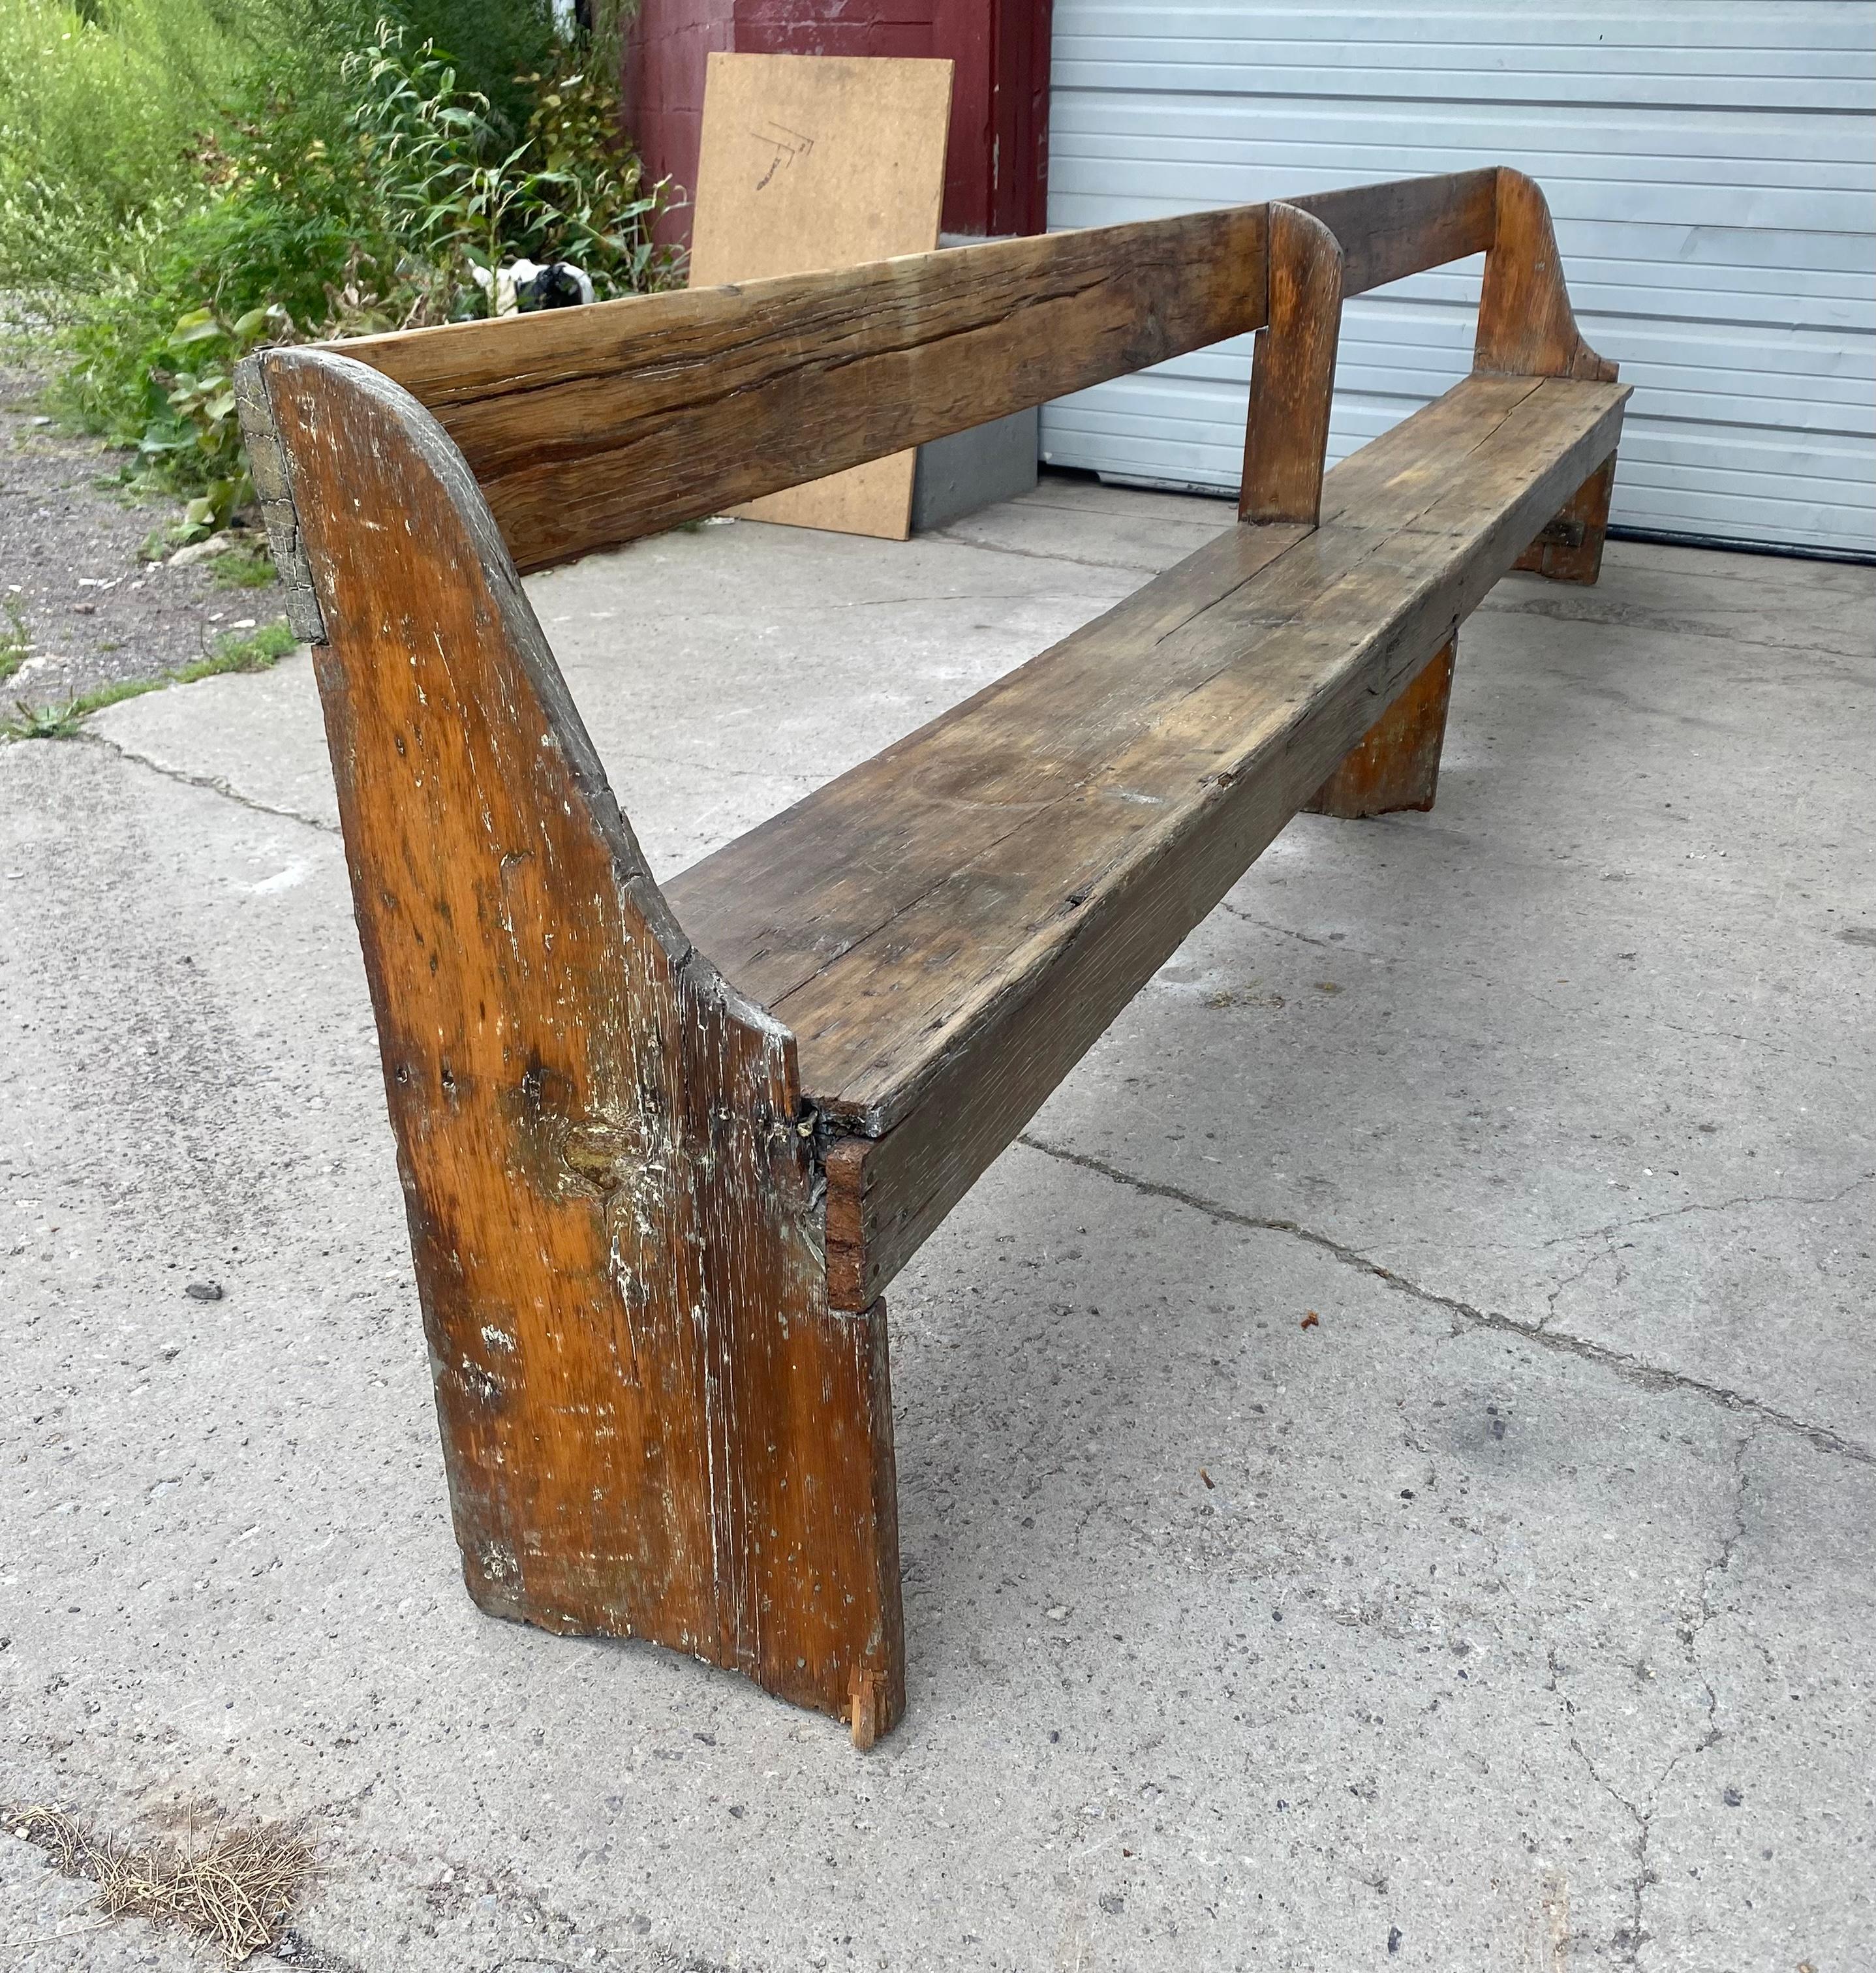 Hand-Crafted Extra long 19th Century single plank primitive bench, over 11 foot long.